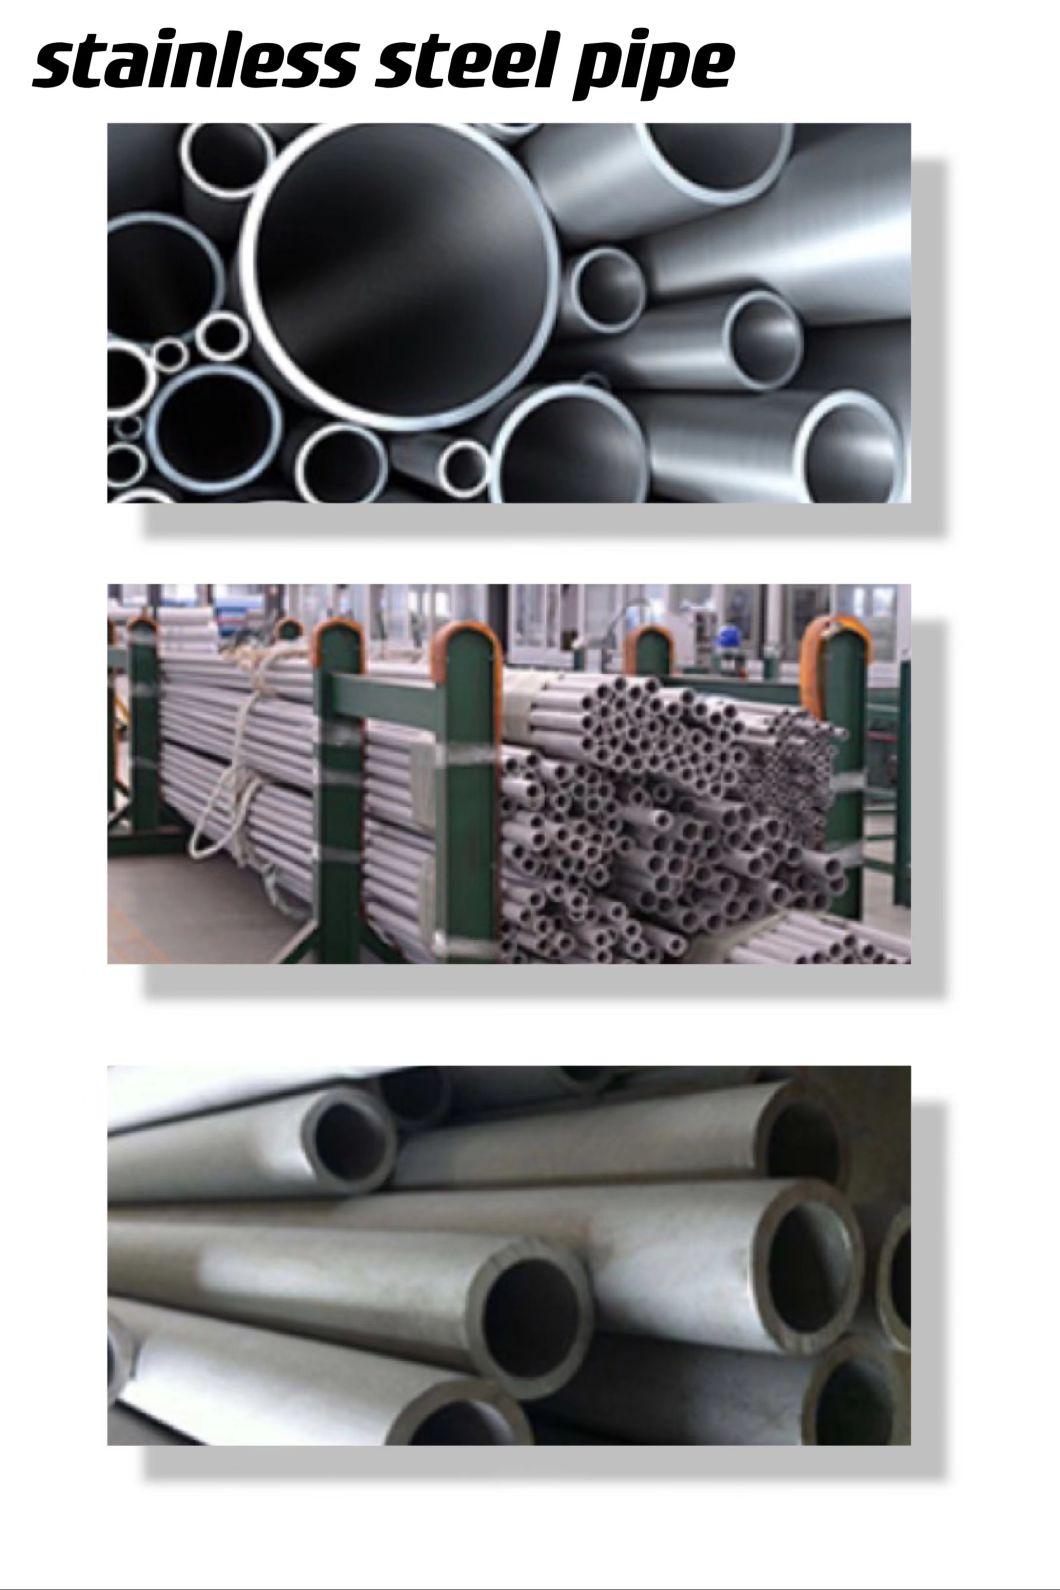 L&T Stainless Steel Pipe Export Aboard